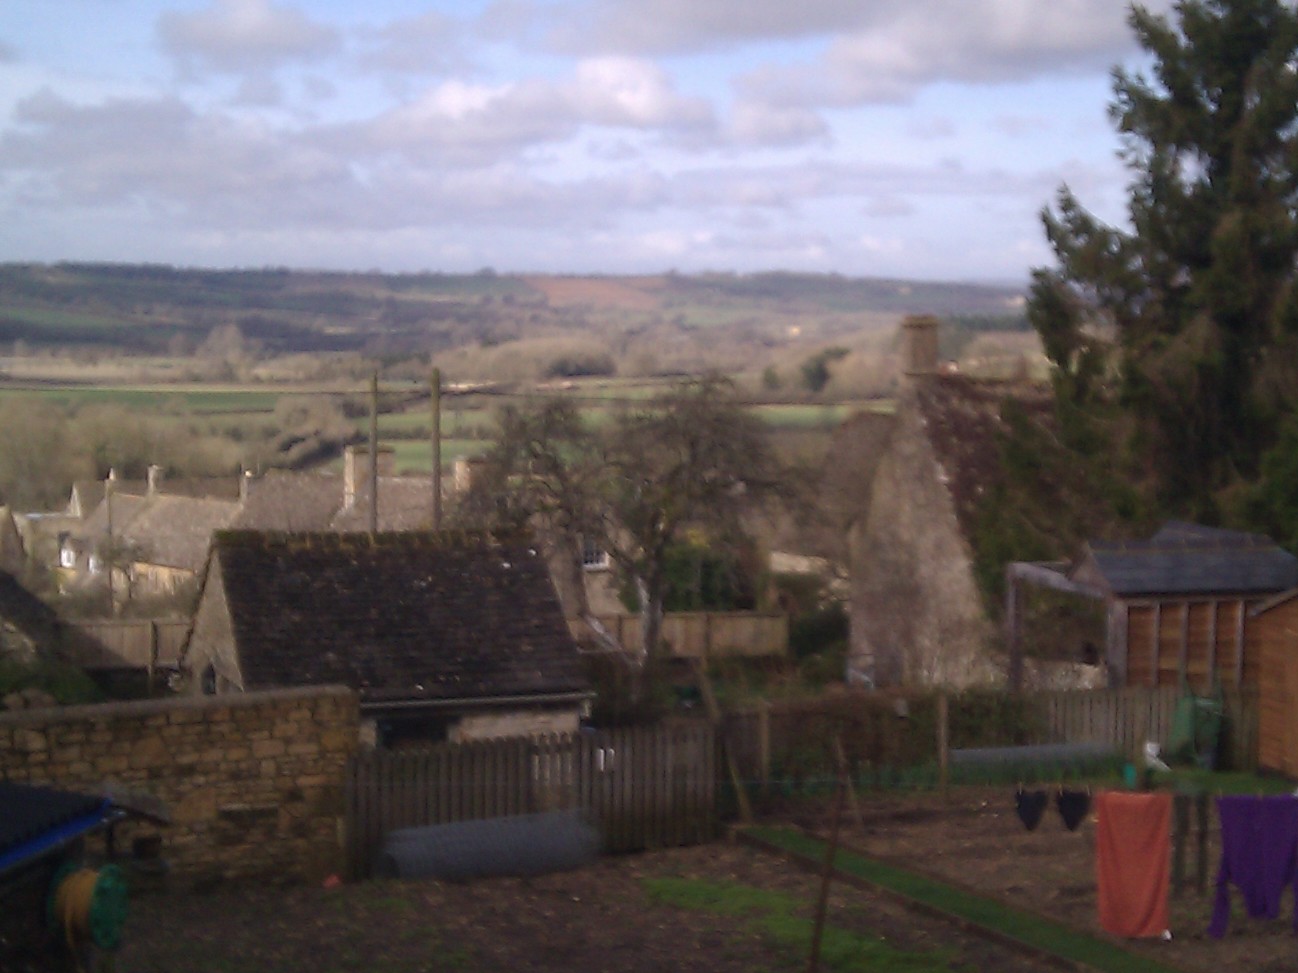 Currently renting a holiday cottage in The Cotswolds. Very pretty.